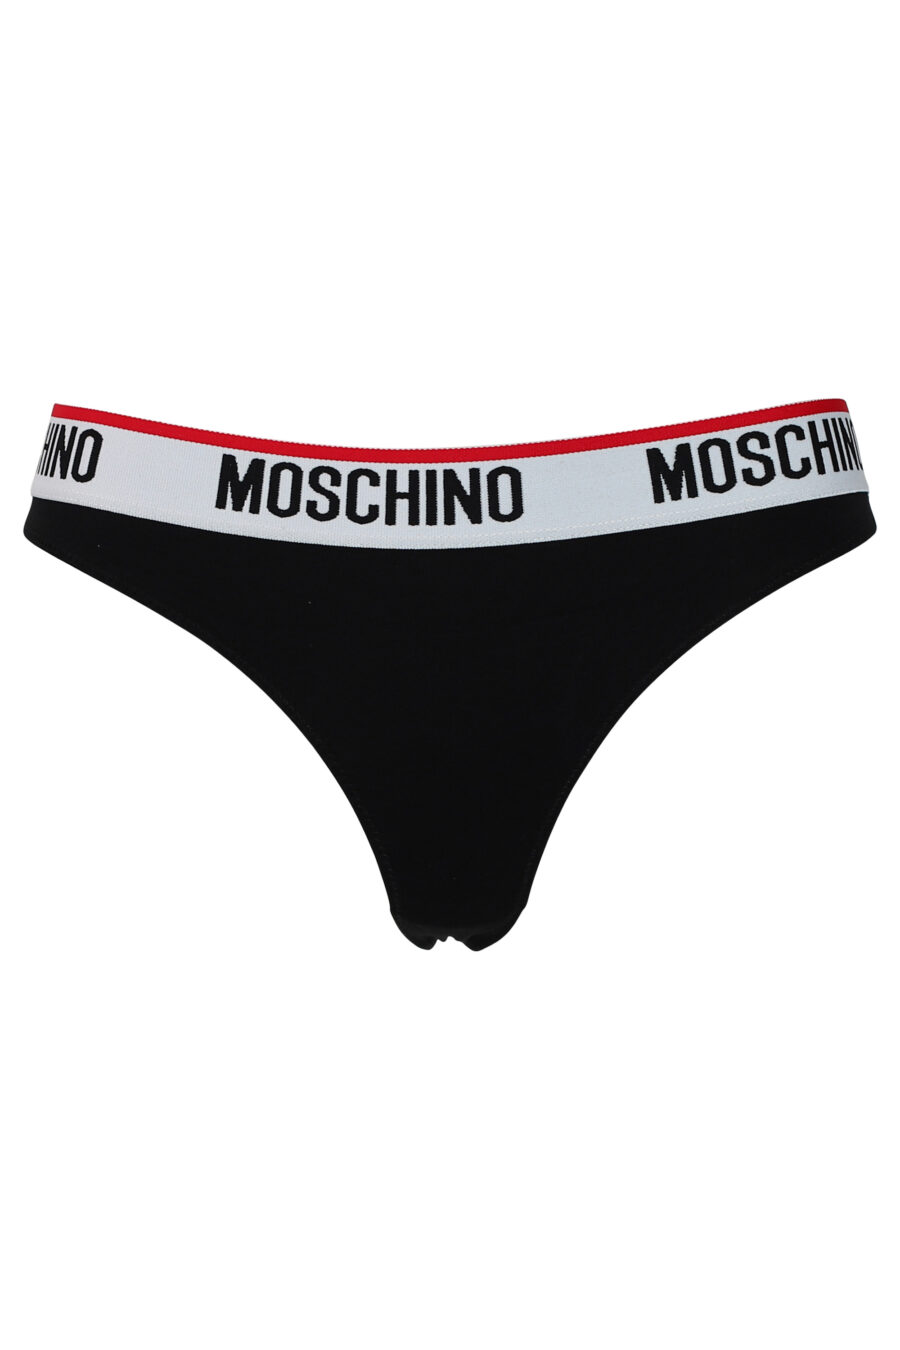 Pack of 2 black thongs with ribbon logo and red line - 889316308235